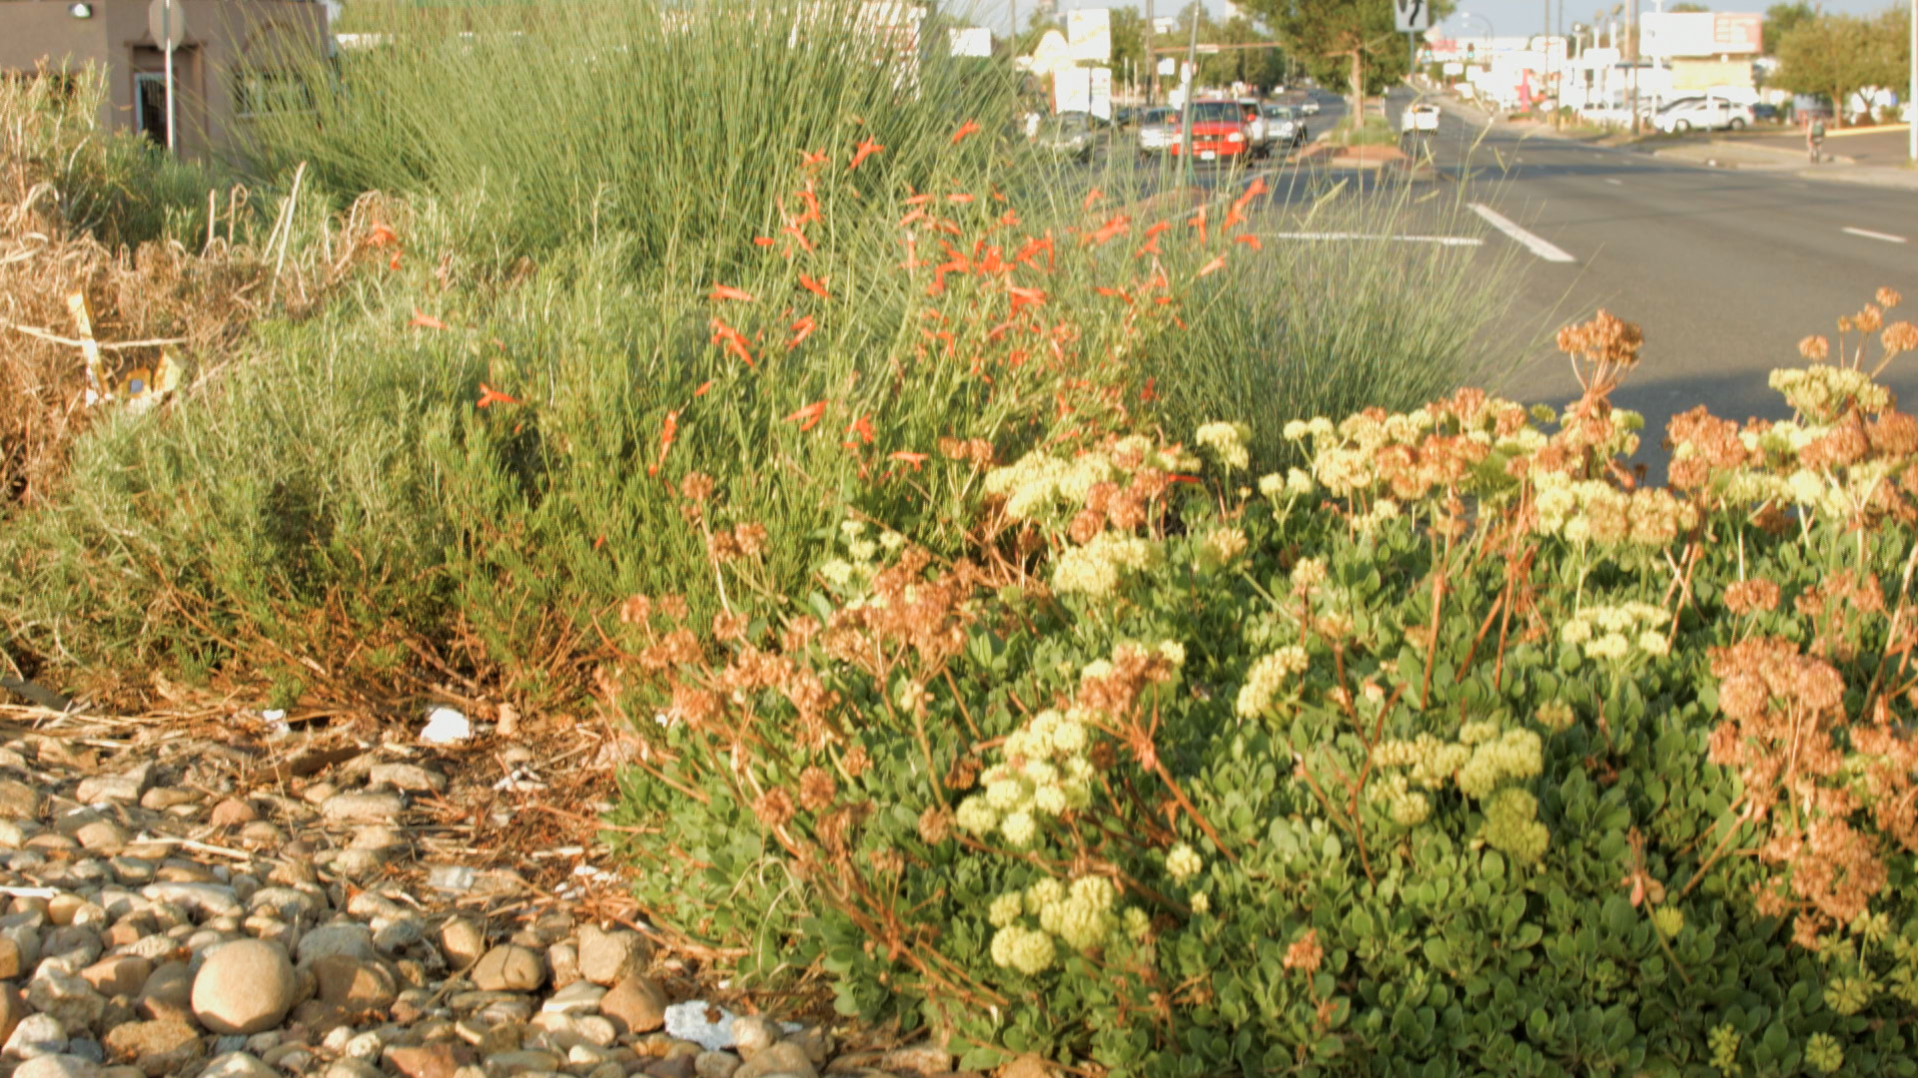 Lakewood is replacing grass in its medians with plants that use less water and are more appropriate for the space.